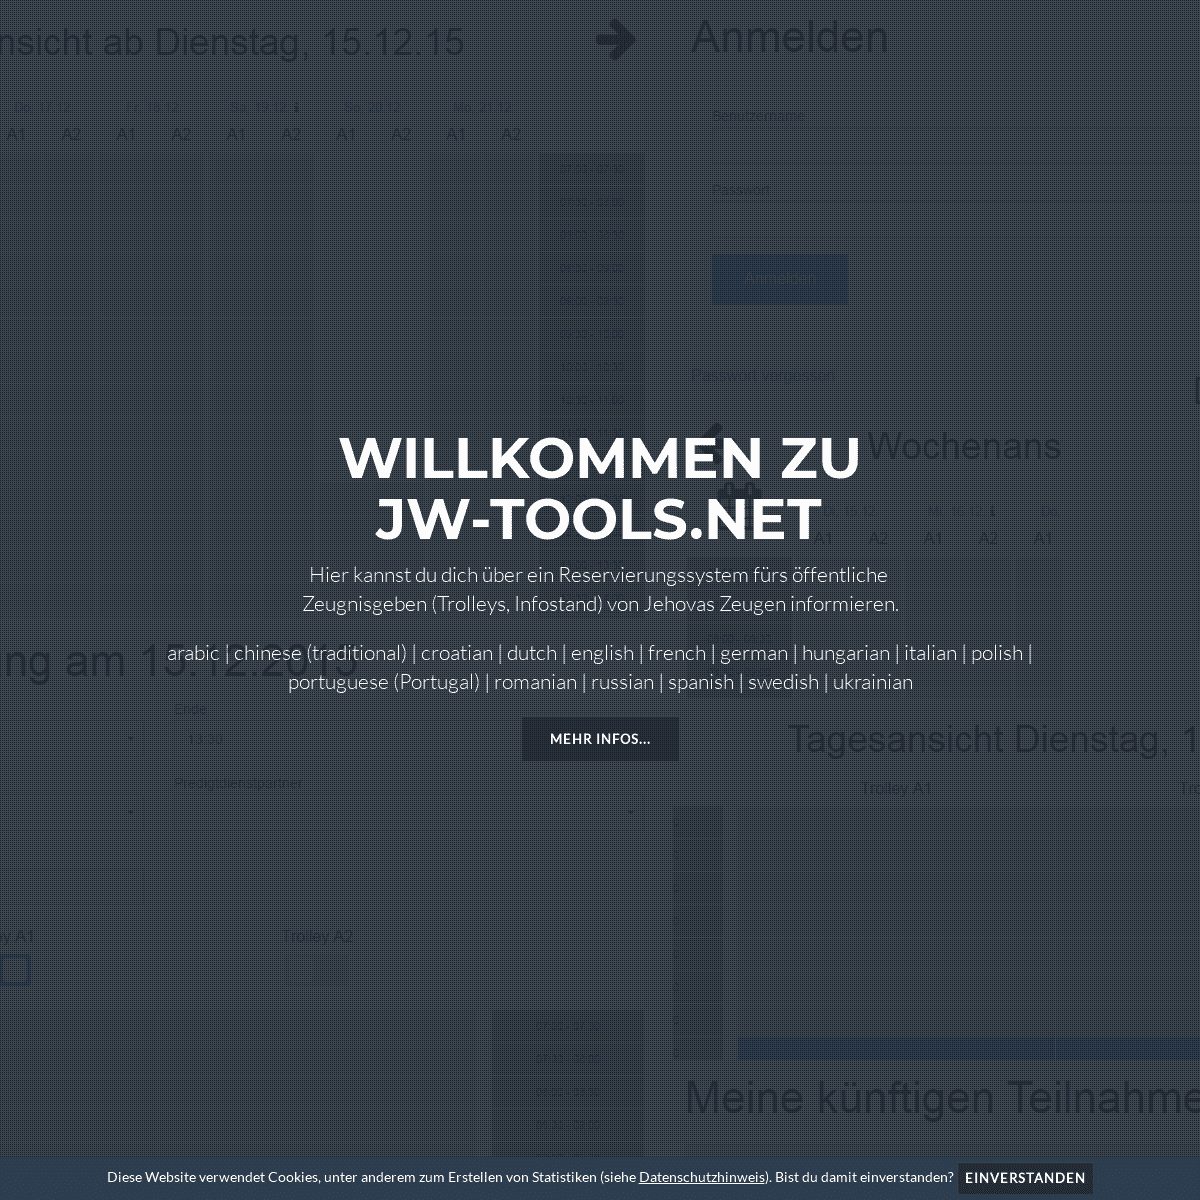 A complete backup of jw-tools.net